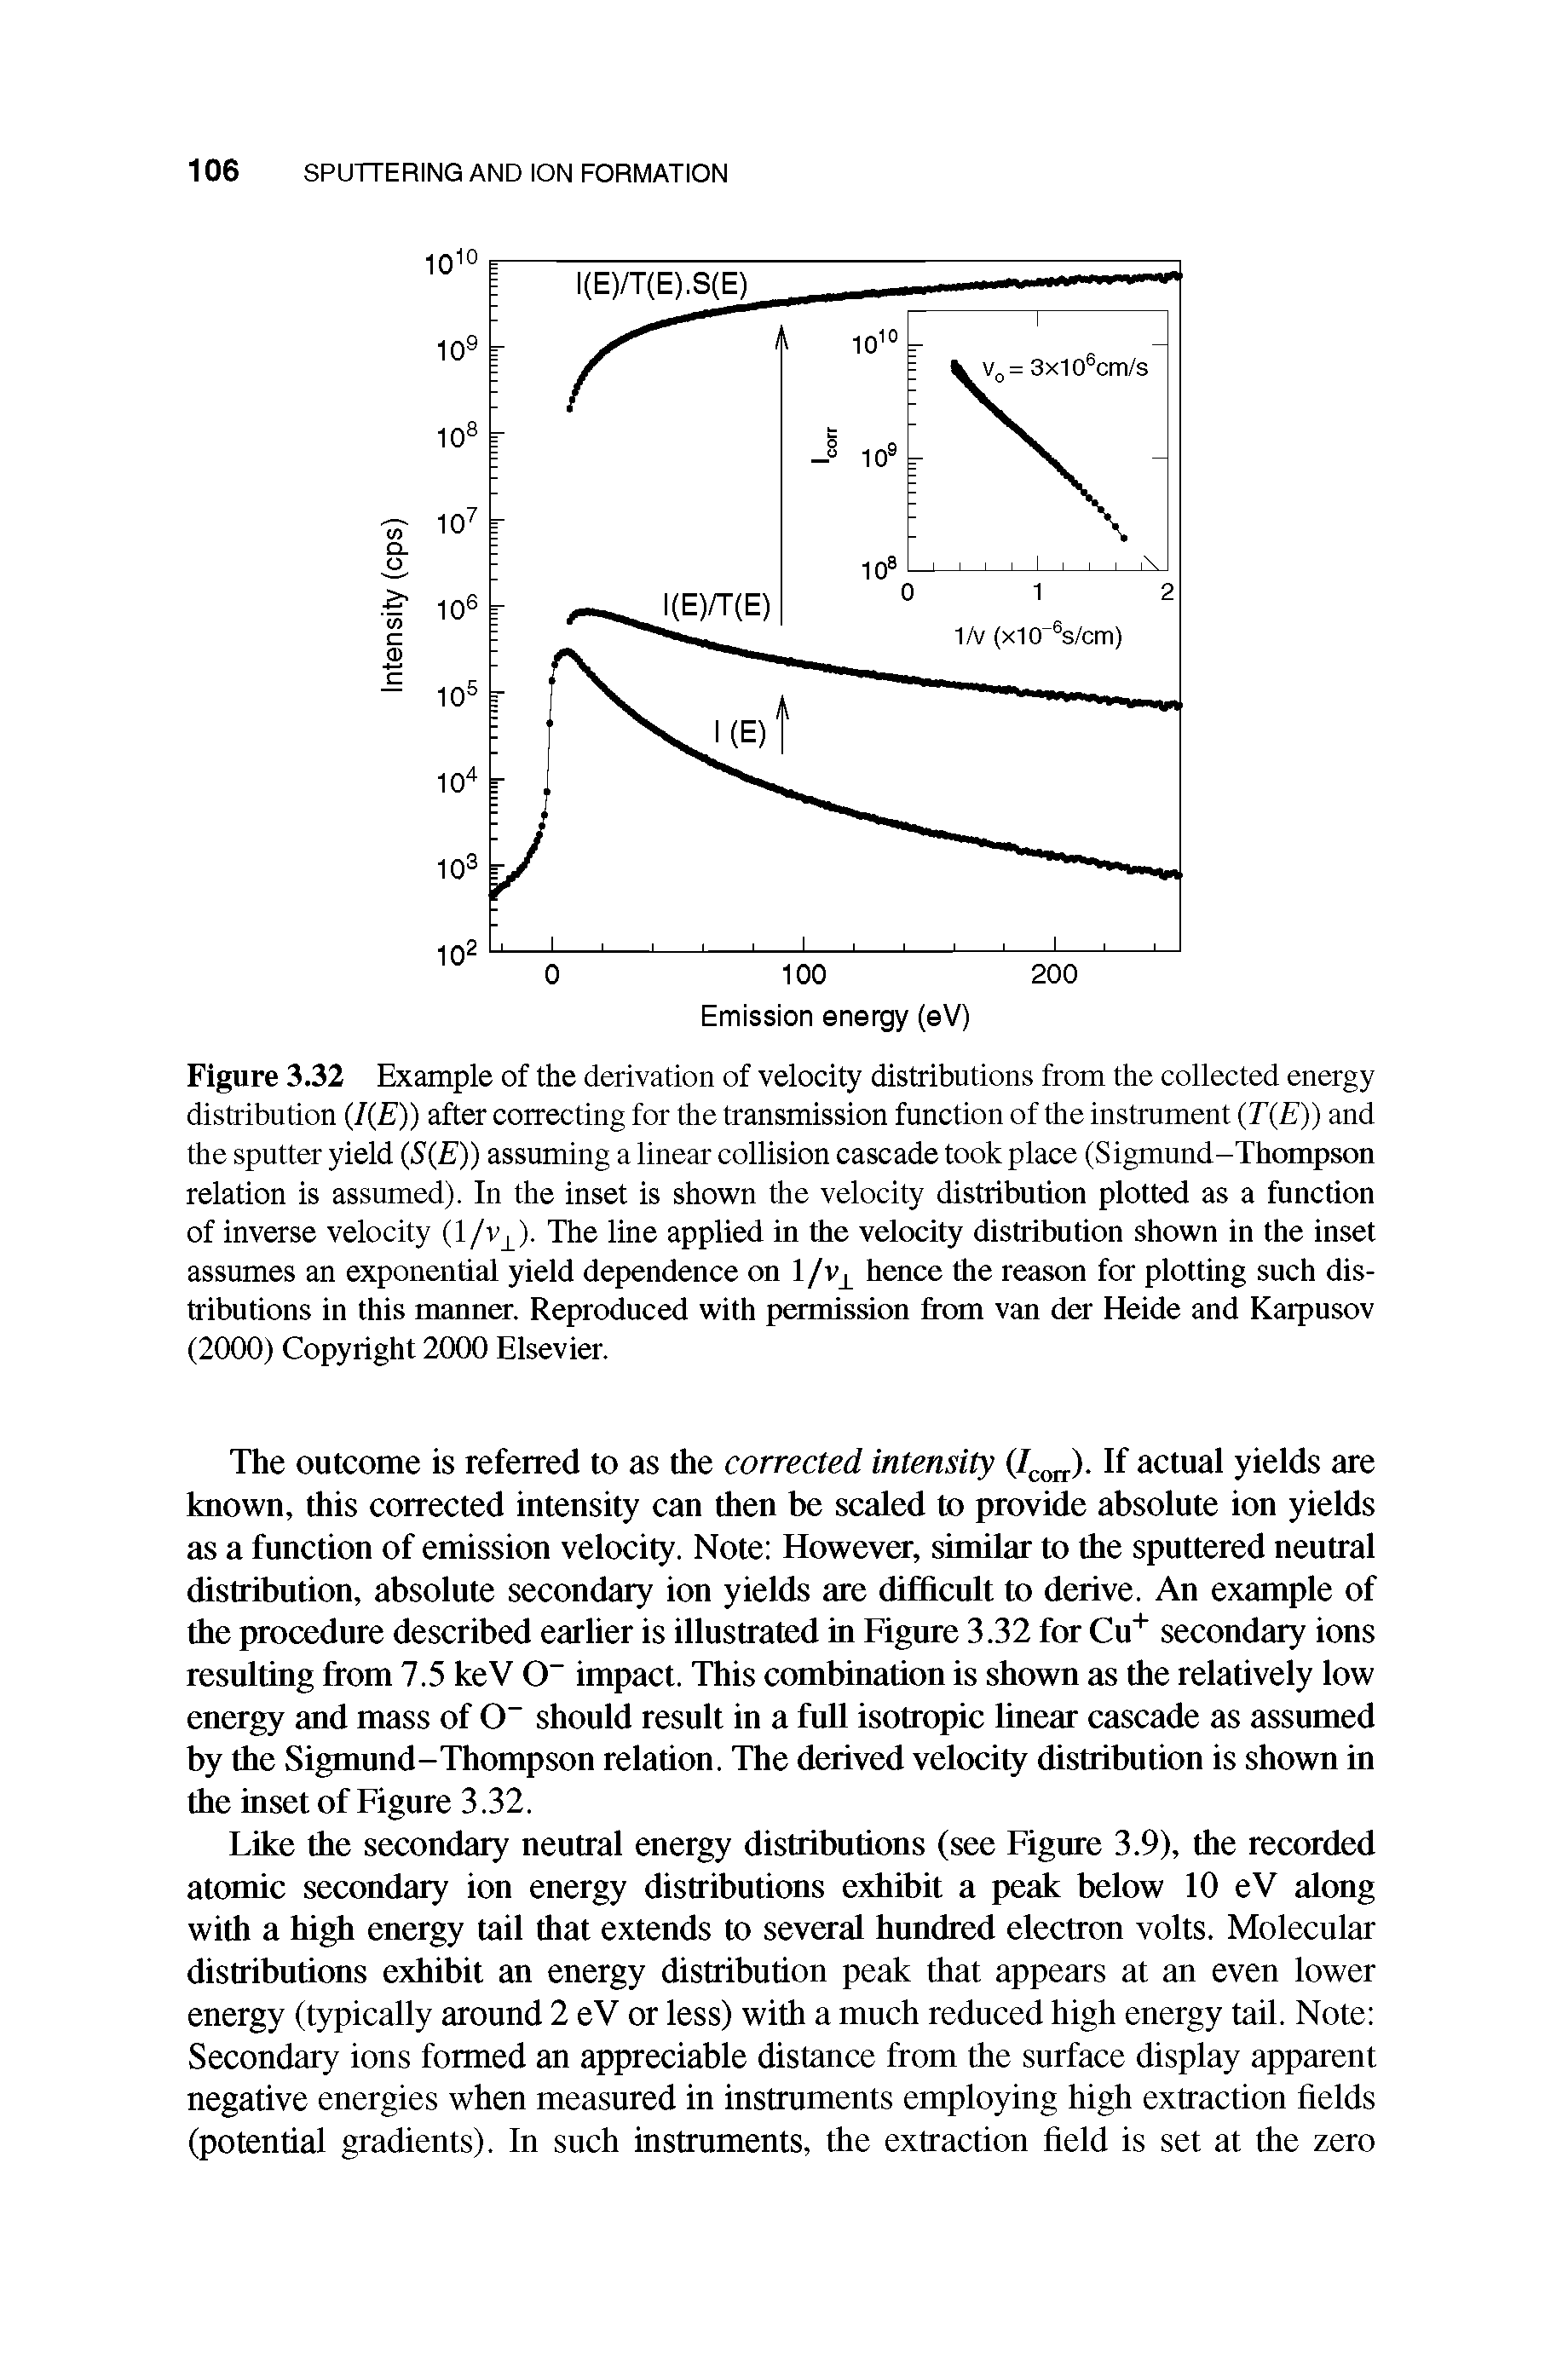 Figure 3.32 Example of the derivation of velocity distributions from the collected energy distribution (1(E)) after correcting for the transmission function of the instrument (T(E)) and the sputter yield (S(E)) assuming a linear collision cascade took place (Sigmund-Thompson relation is assumed). In the inset is shown the velocity distribution plotted as a function of inverse velocity (1/vj ). The line applied in the velocity distribution shown in the inset assumes an exponential yield dependence on 1/vj hence the reason for plotting such distributions in this manner. Reproduced with permission from van der Heide and Karpusov (2000) Copyright 2000 Elsevier.